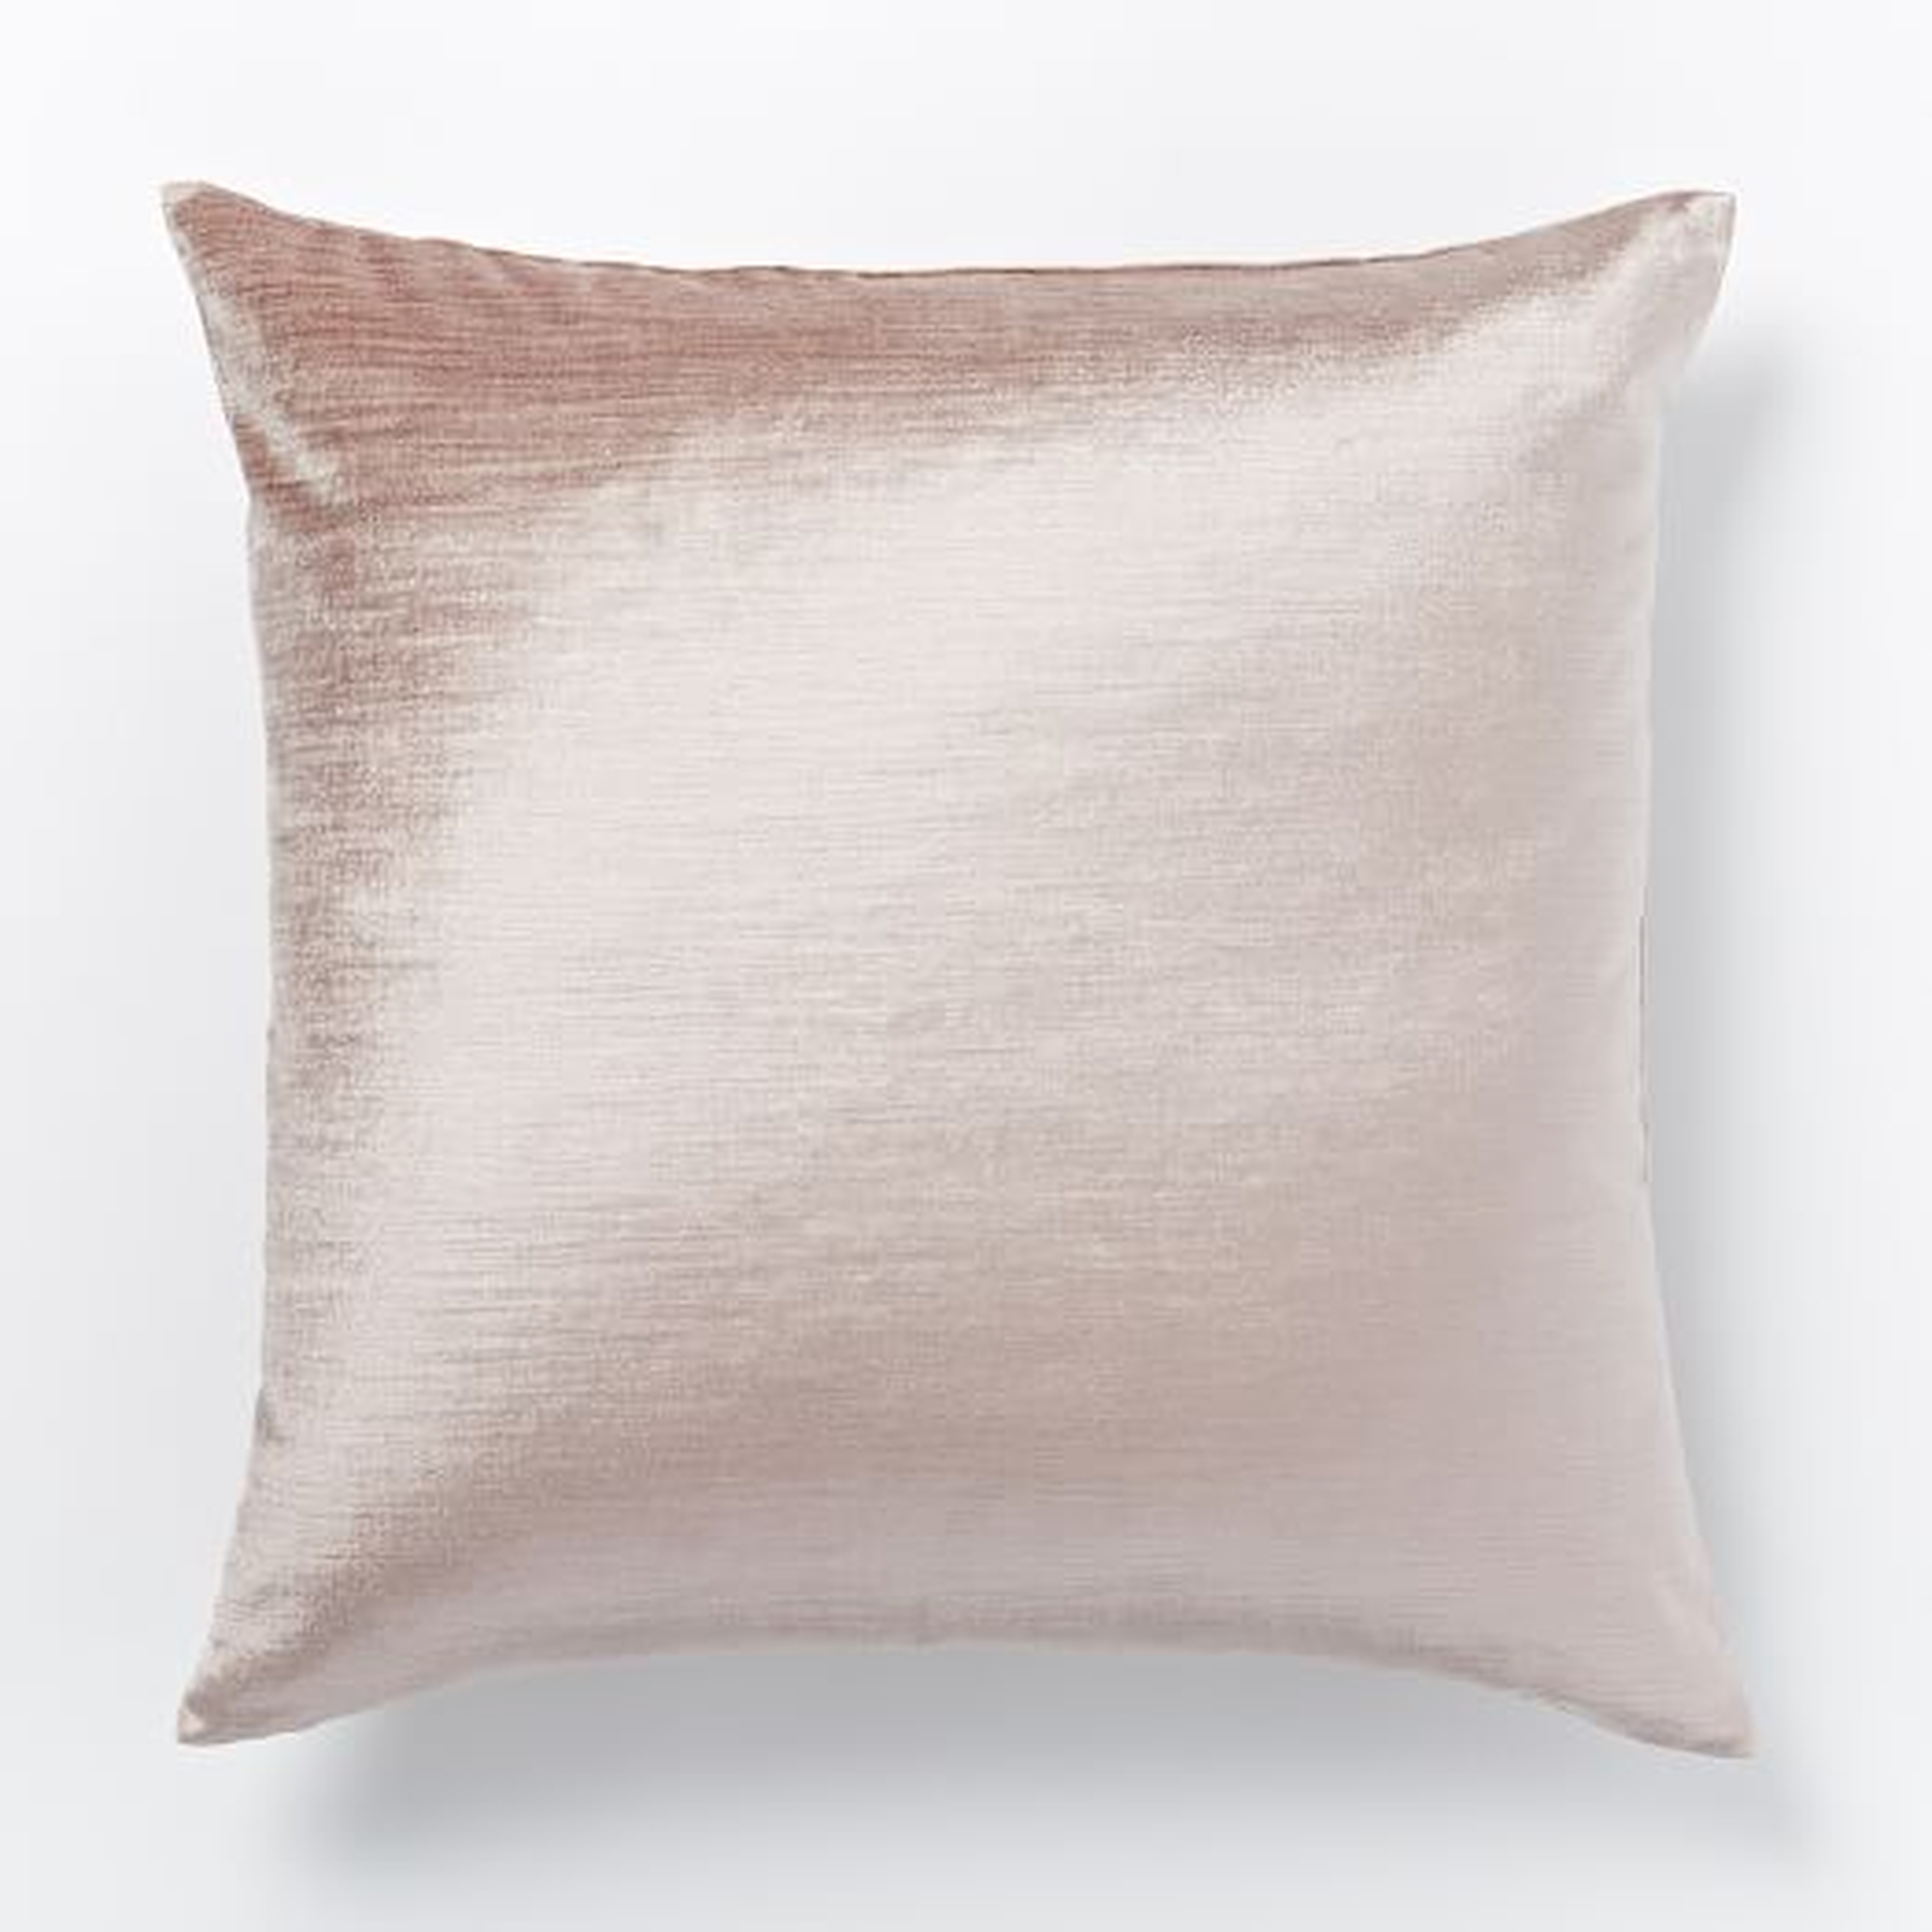 Cotton Luster Velvet Pillow Cover - Without Insert - West Elm